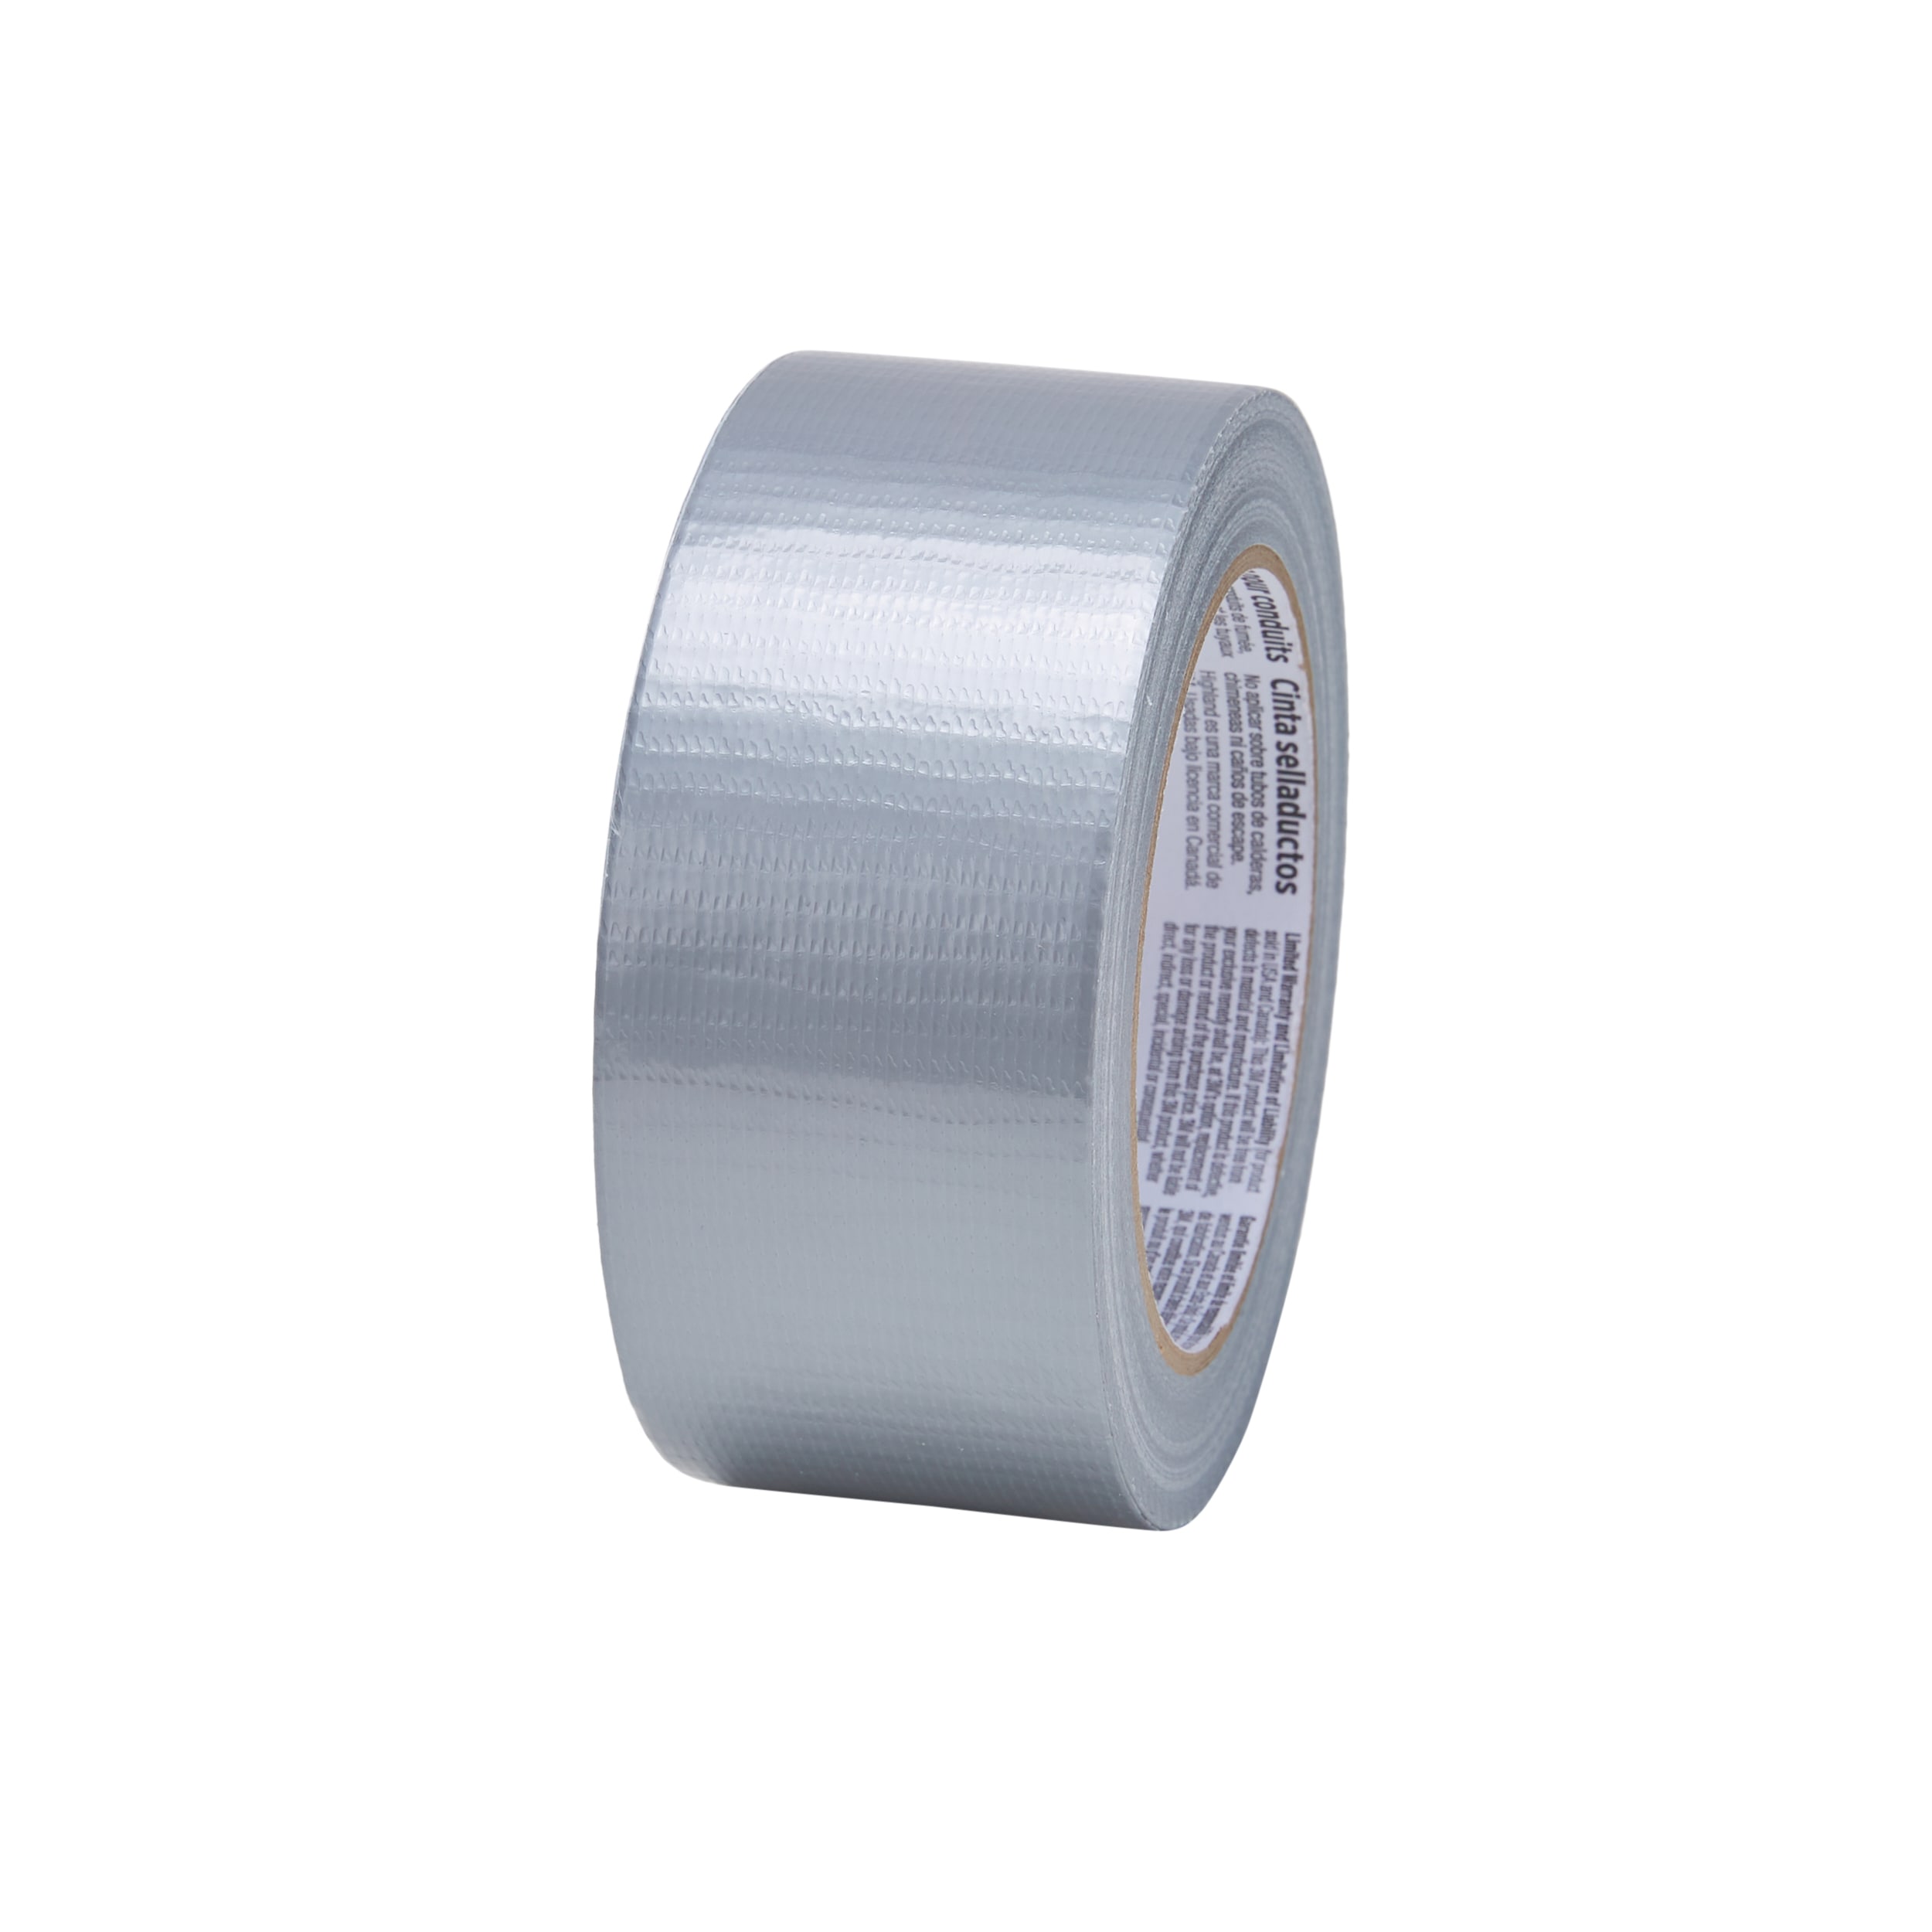 3M Utility Gray Rubberized Duct Tape 1.88-in x 30 Yard(S) in the